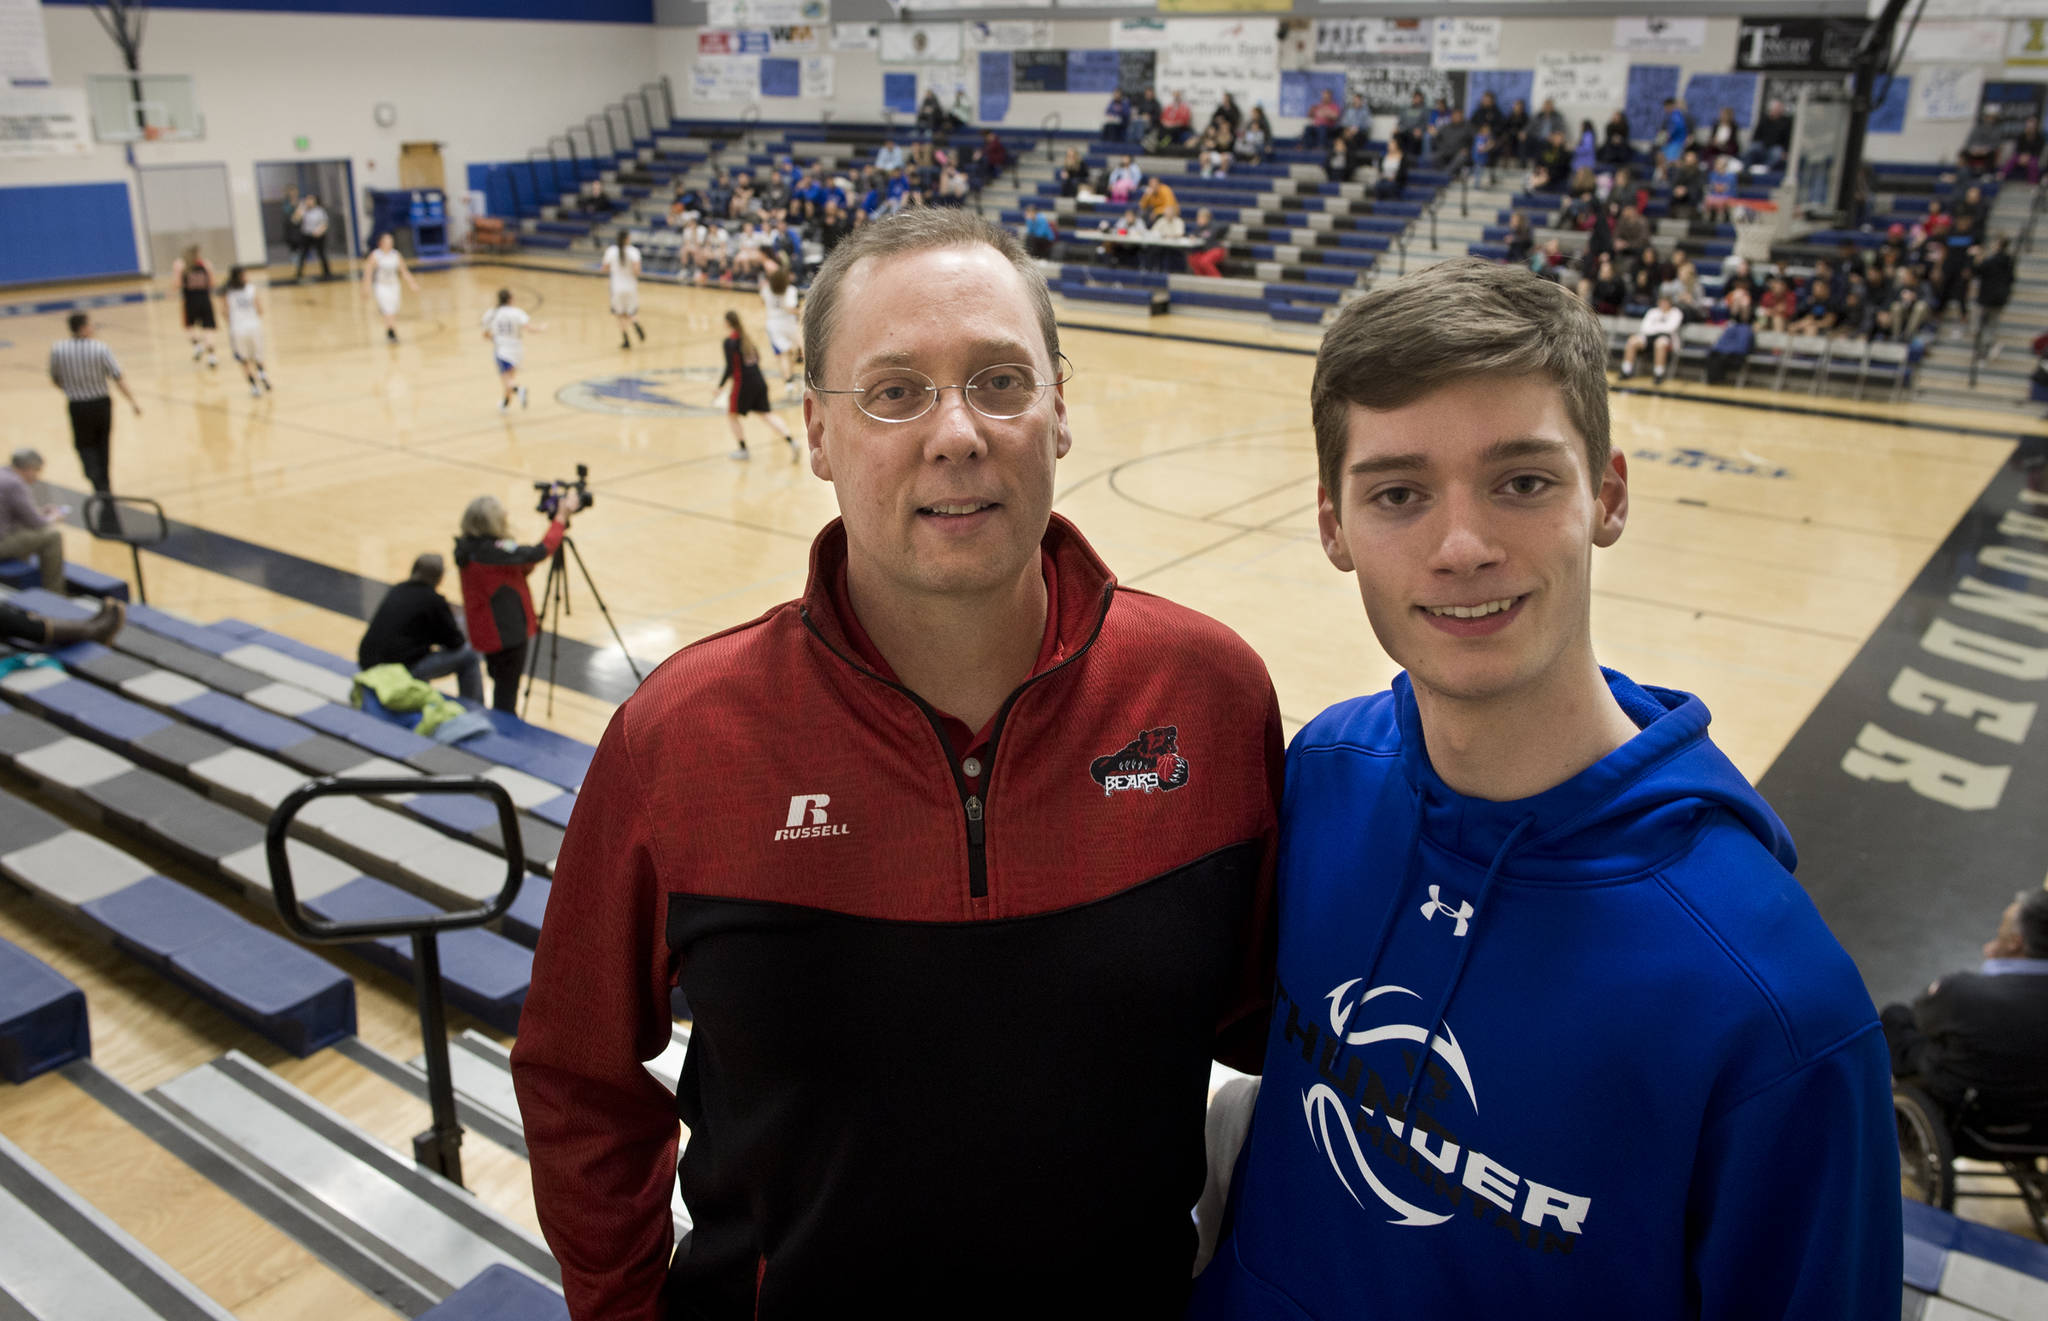 John Sleppy and his son, Justin, 18, photographed at the Thunder Mountain High School gymnasium on Feb. 1. John is an assistant coach for the Juneau-Douglas High School boys varsity team and Justin is a student team manager for the Thunder Mountain High School boys varsity team. (Michael Penn | Juneau Empire)